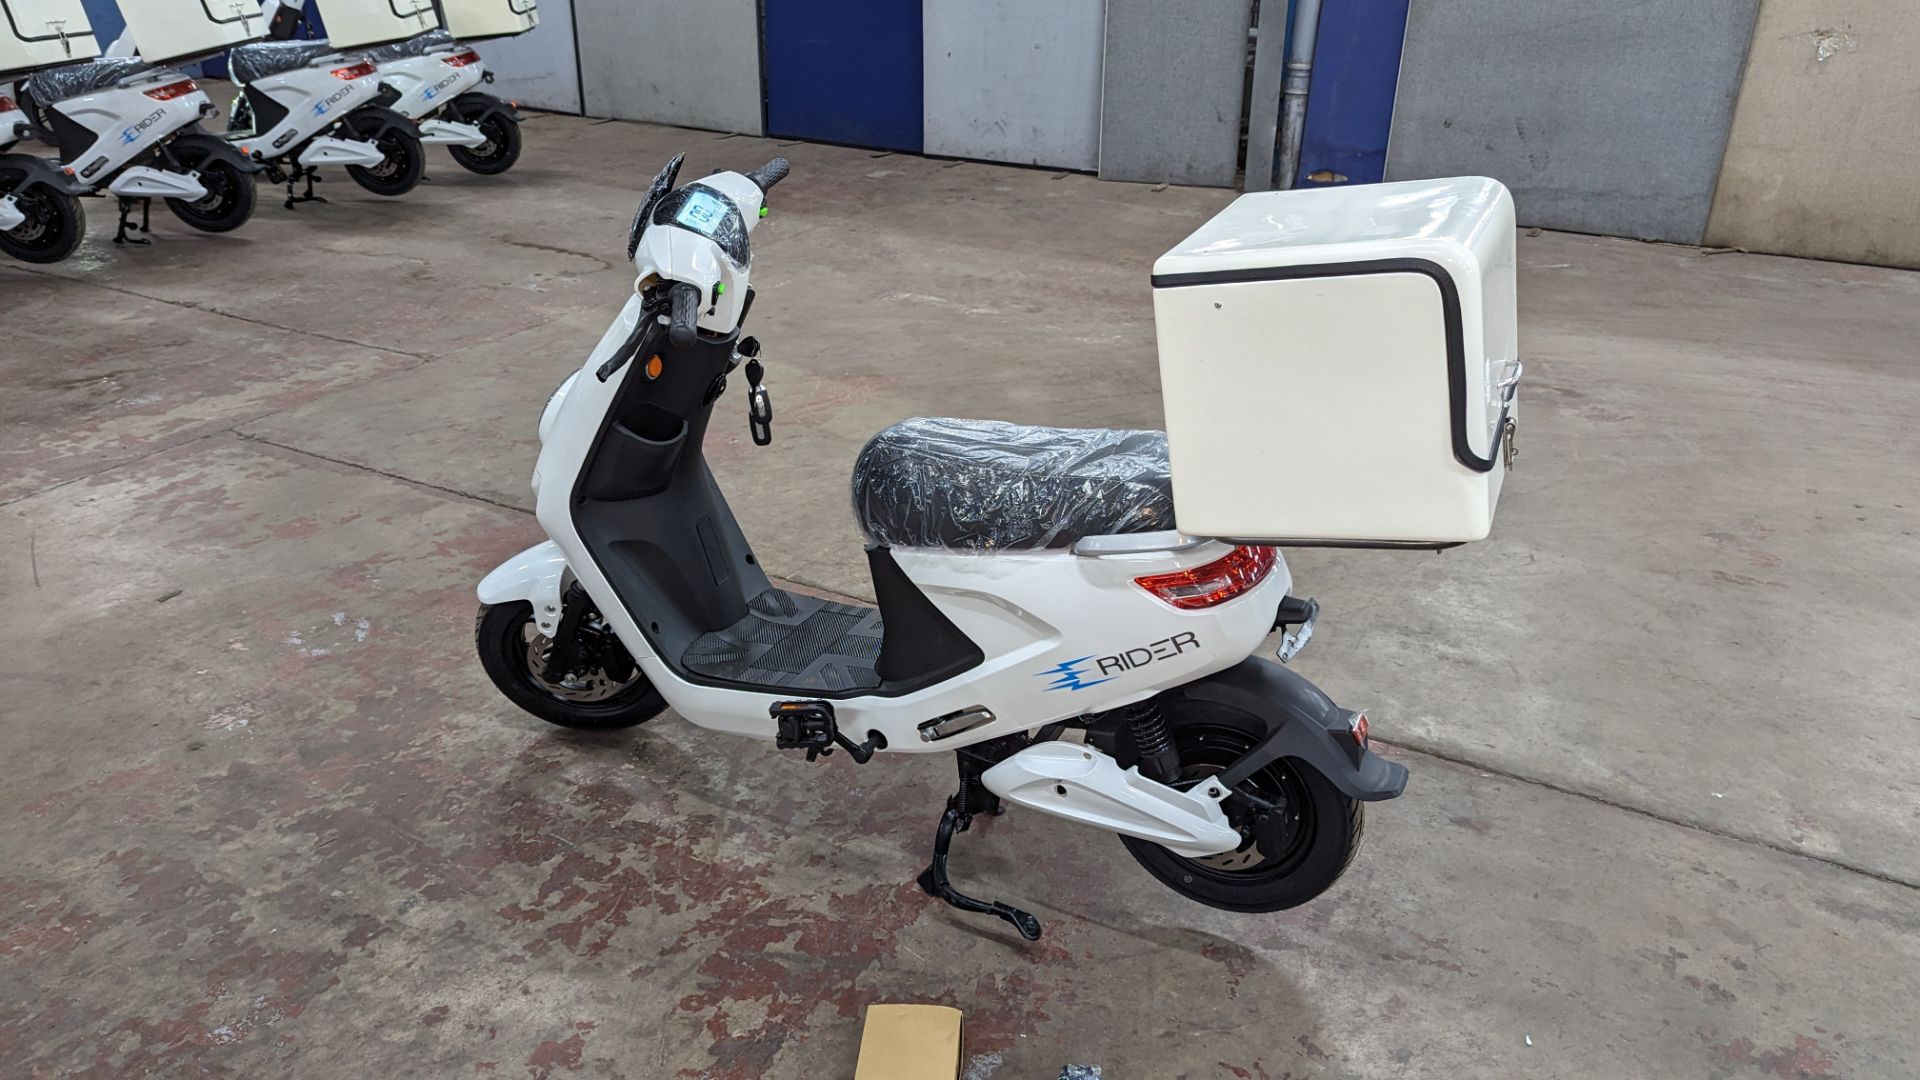 Model 18 Electric Bike: Zero (0) recorded miles, white body with black detailing, insulated box moun - Image 3 of 15